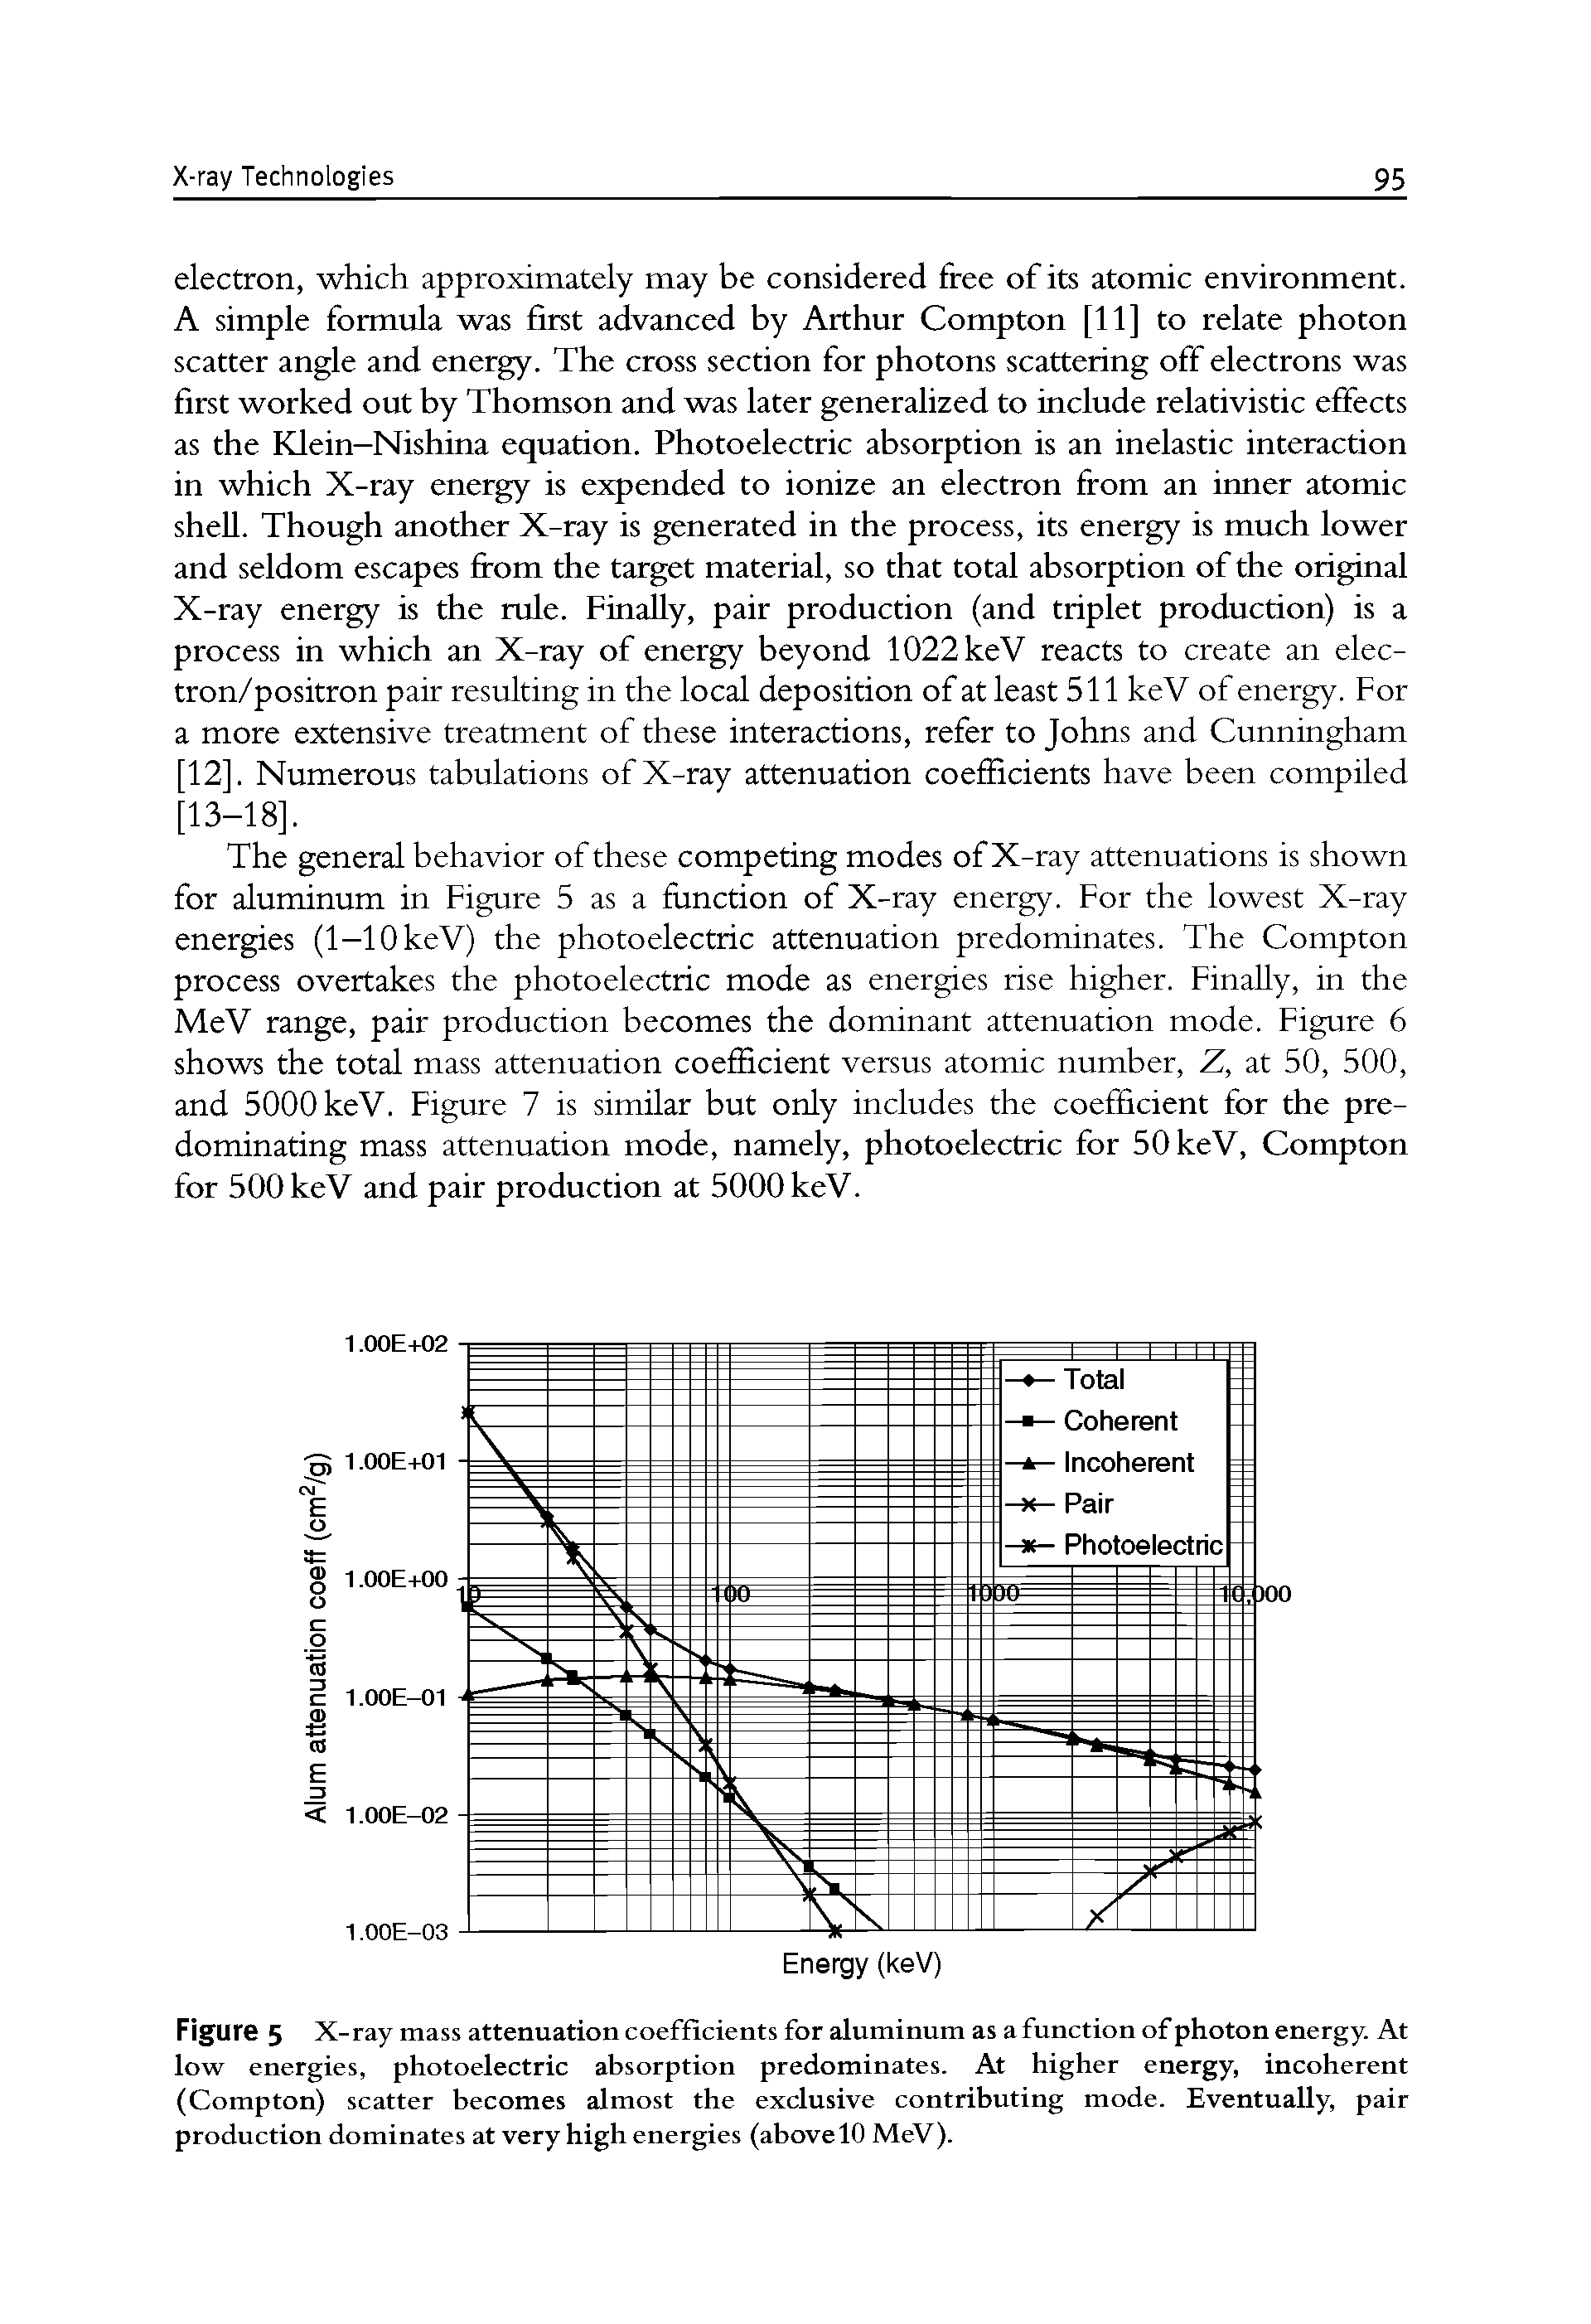 Figure 5 X-ray mass attenuation coefficients for aluminum as a function of photon energy. At low energies, photoelectric absorption predominates. At higher energy, incoherent (Compton) scatter becomes almost the exclusive contributing mode. Eventually, pair production dominates at very high energies (above 10 MeV).